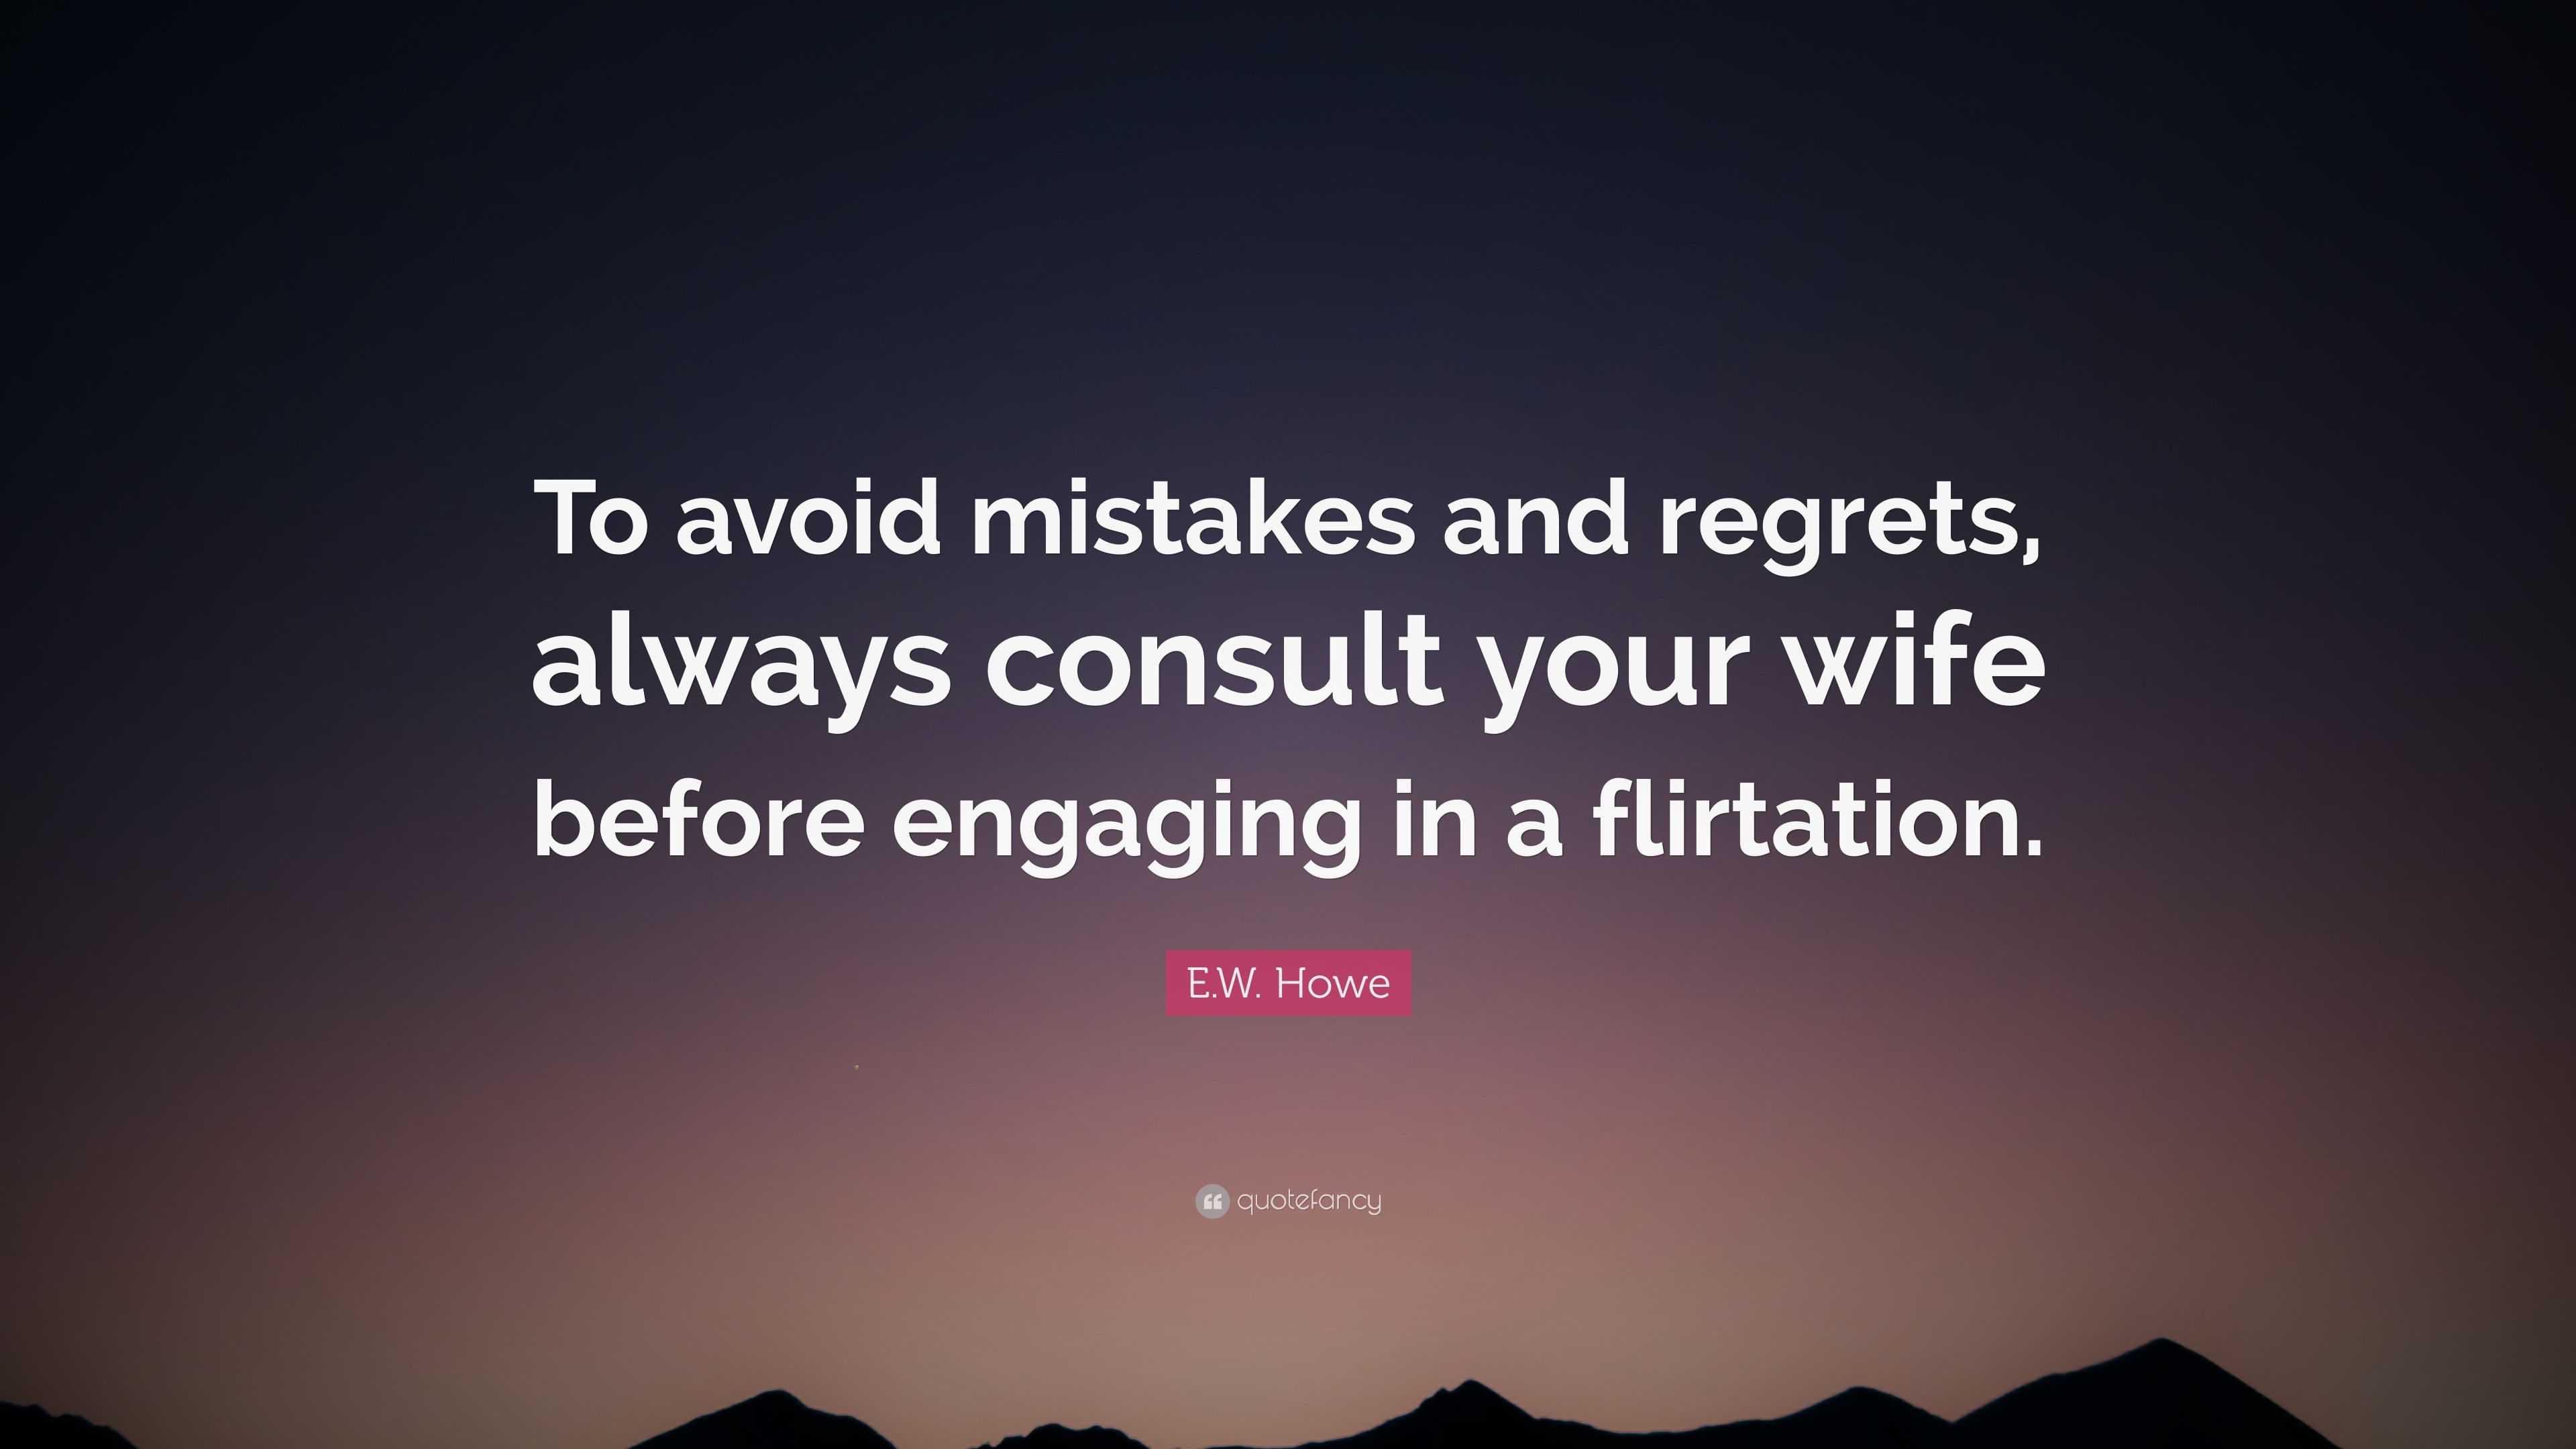 E.W. Howe Quote: “To avoid mistakes and regrets, always consult